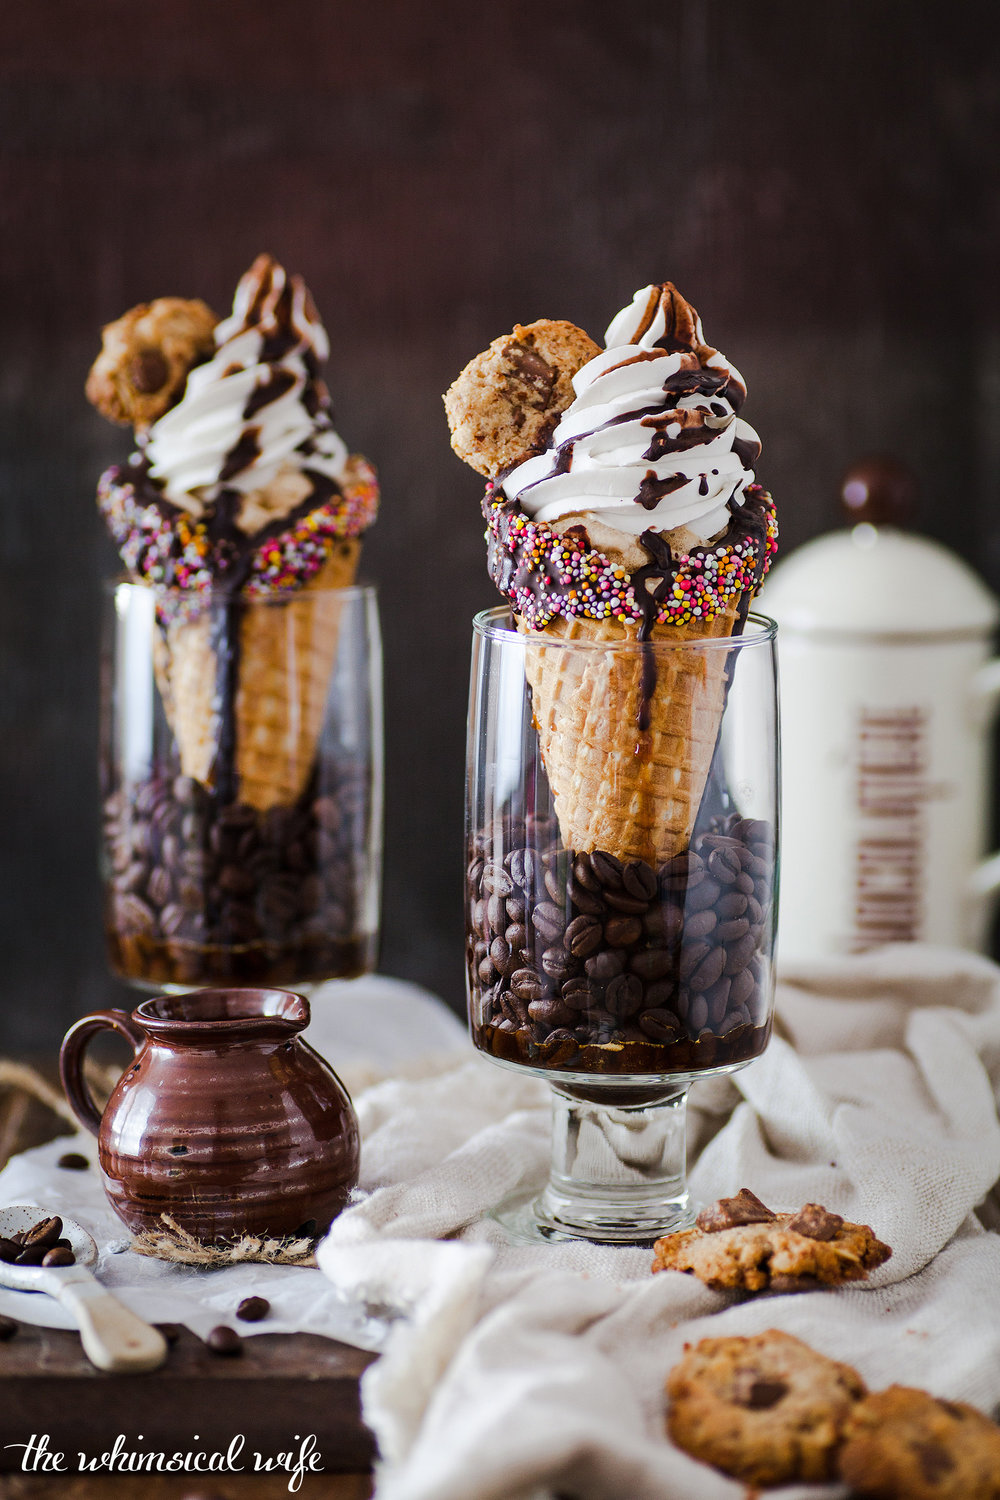 Homemade Coconut Waffle Cones - Southern Kissed